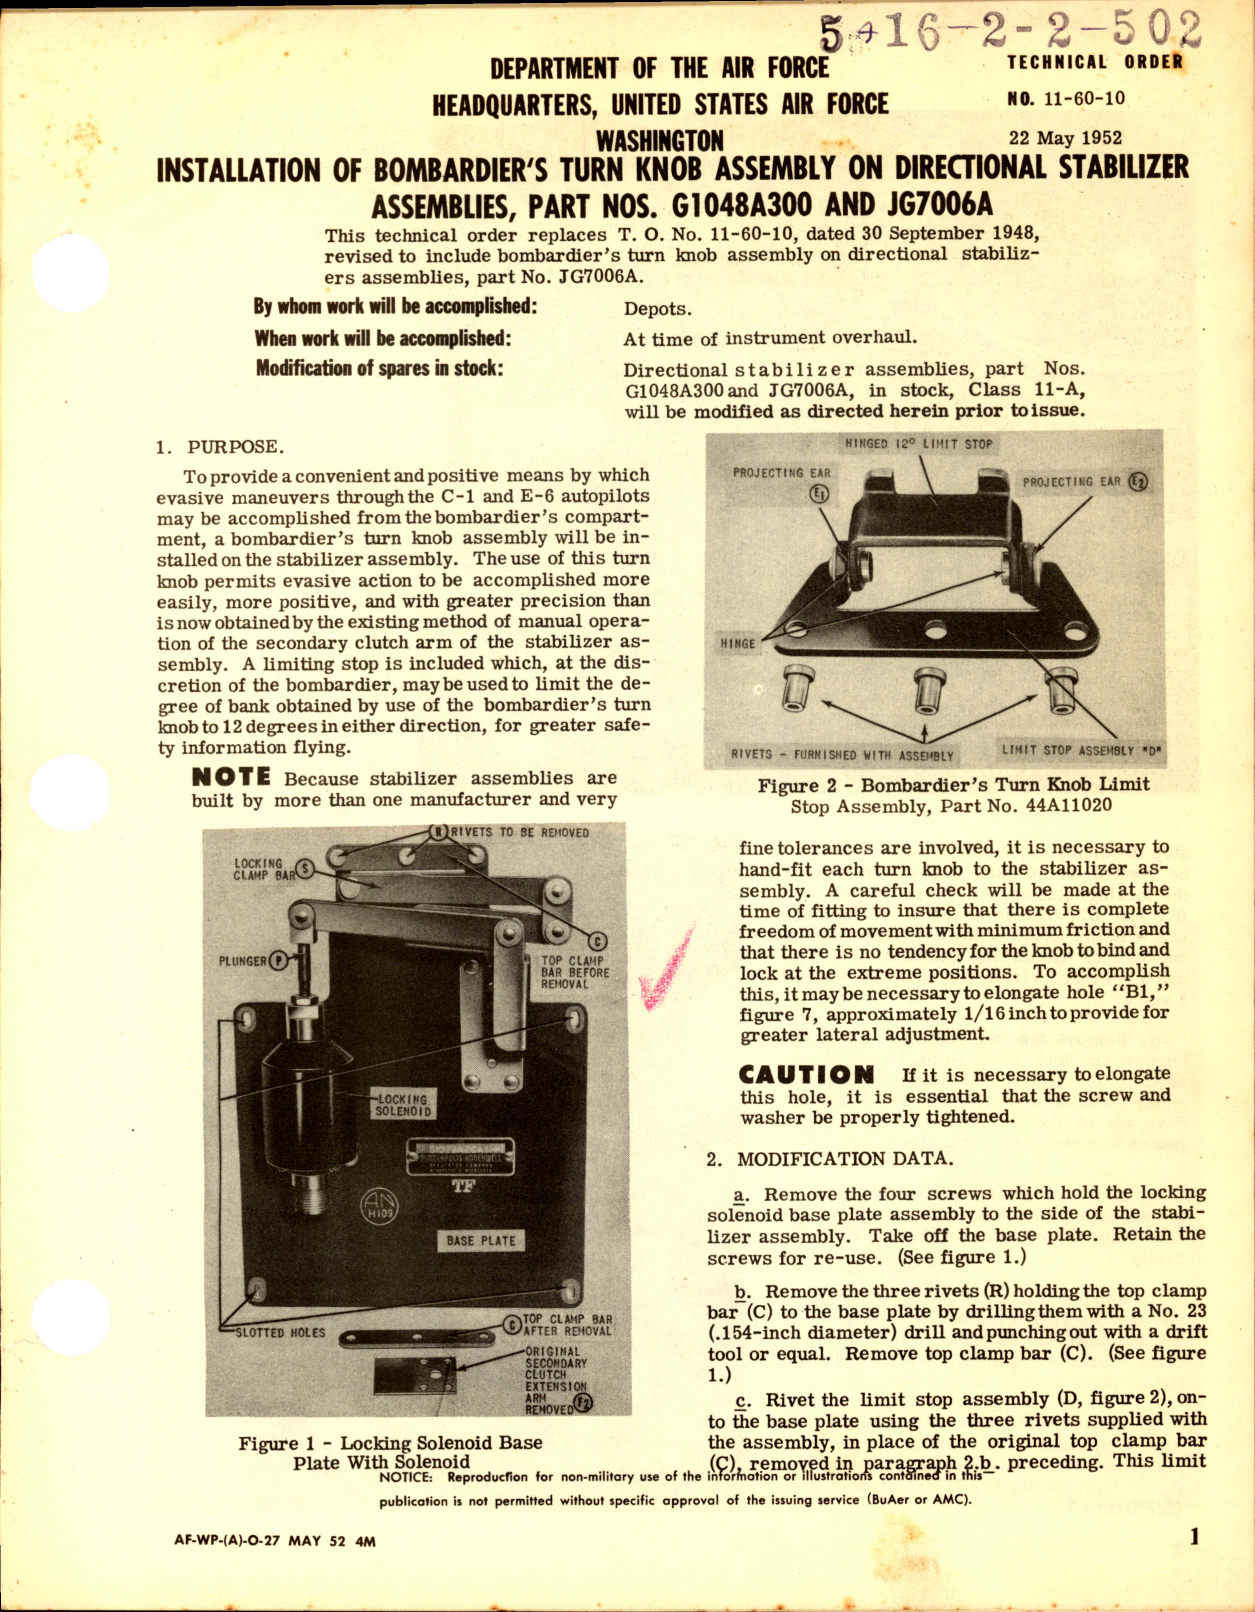 Sample page 1 from AirCorps Library document: Installation of Bombardier's Turn Knob Assembly